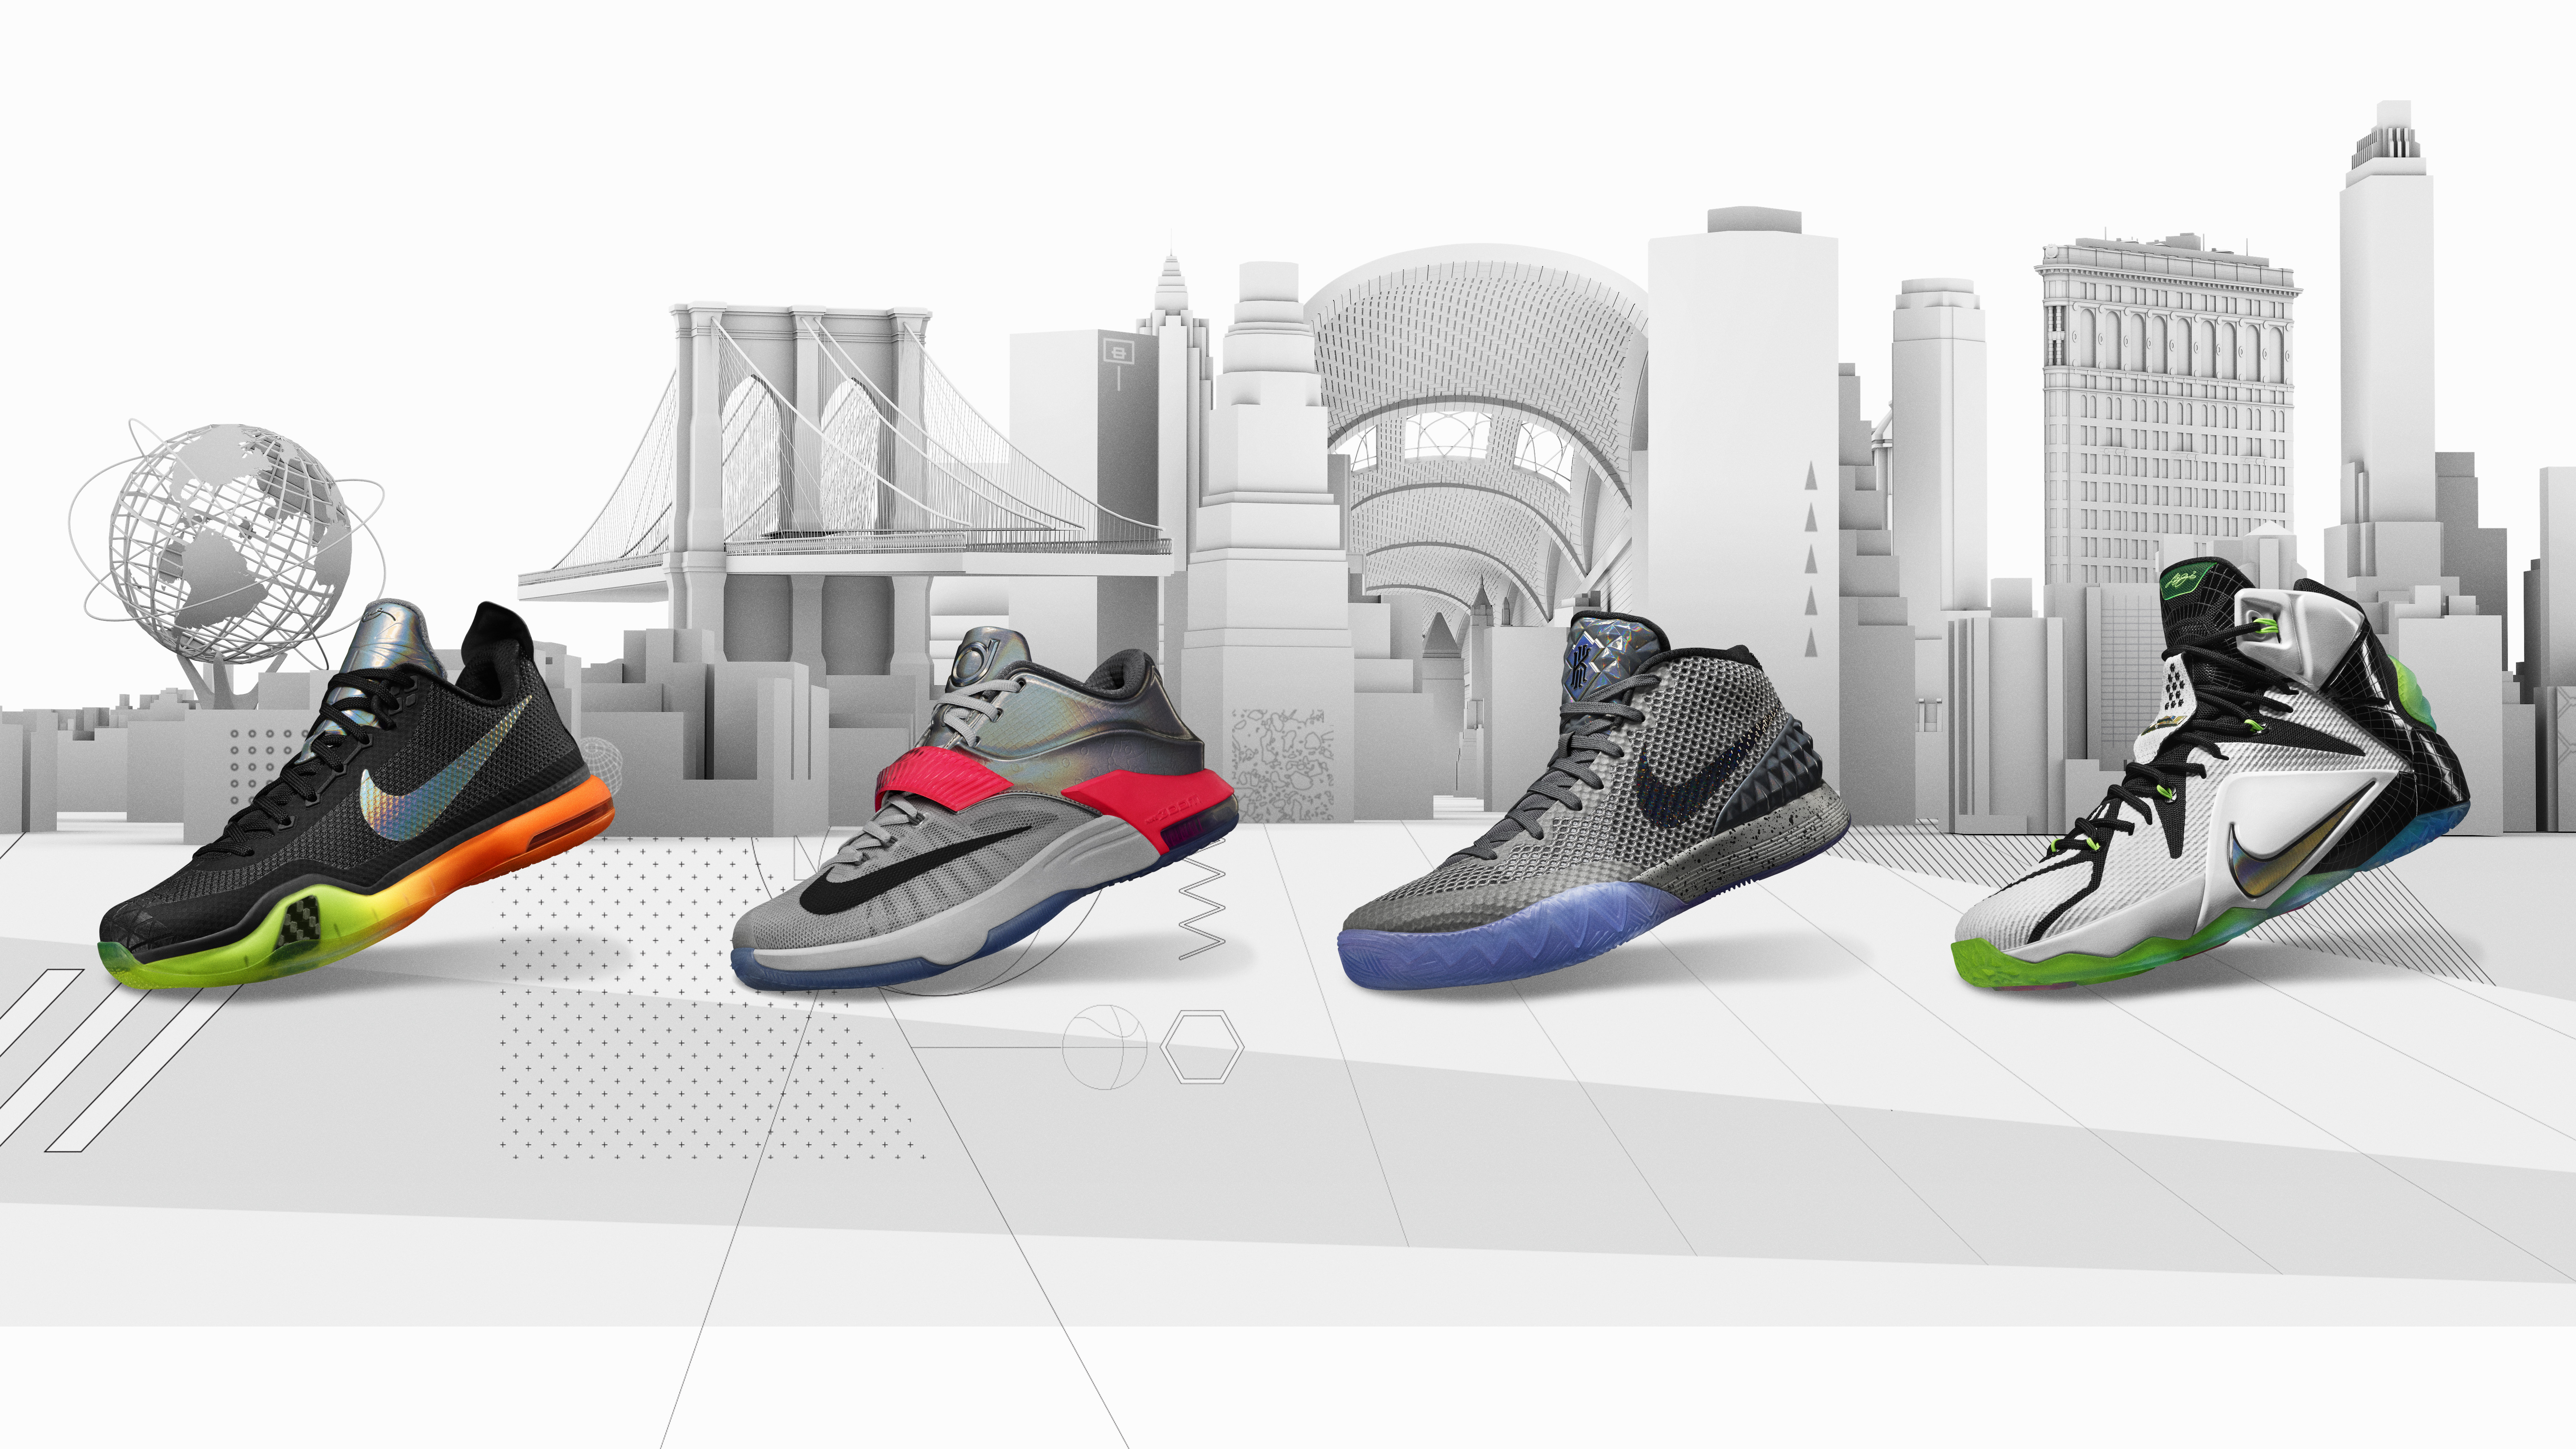 Nike Basketball Collection Honors Nyc's Iconic Cityscape Nike Basketball Shoes